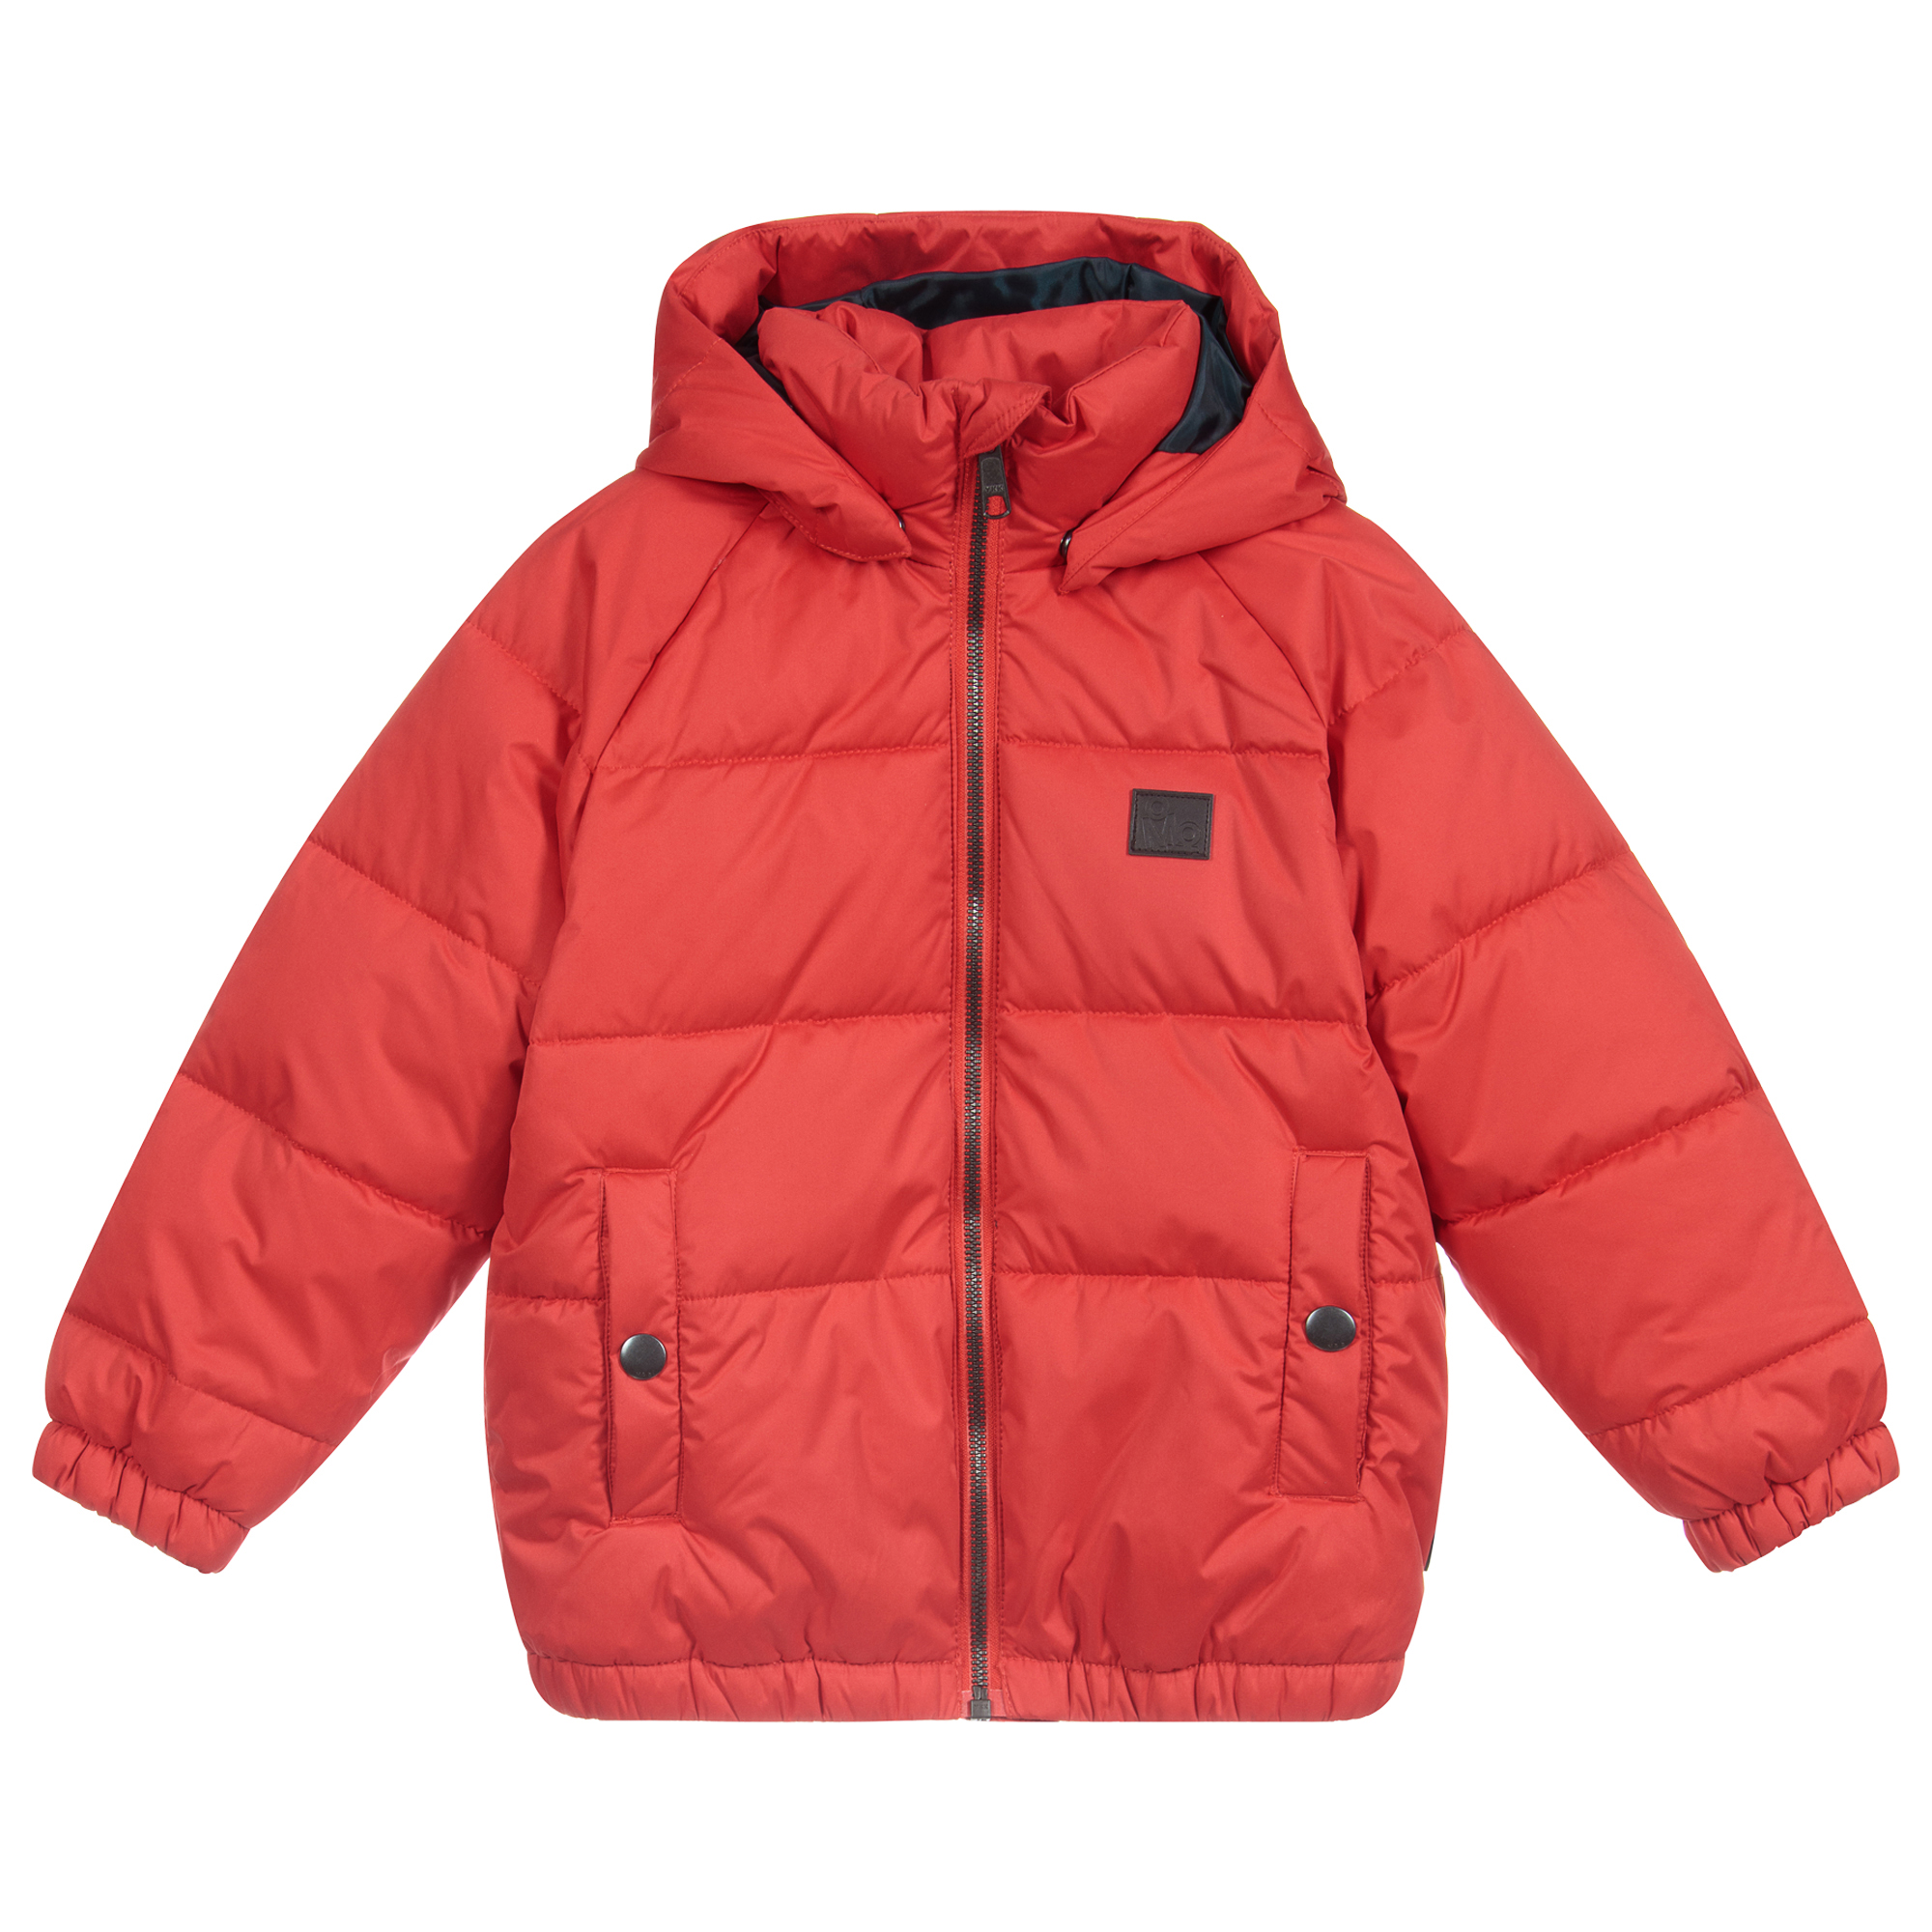 Molo - Boys Red Puffer Jacket 